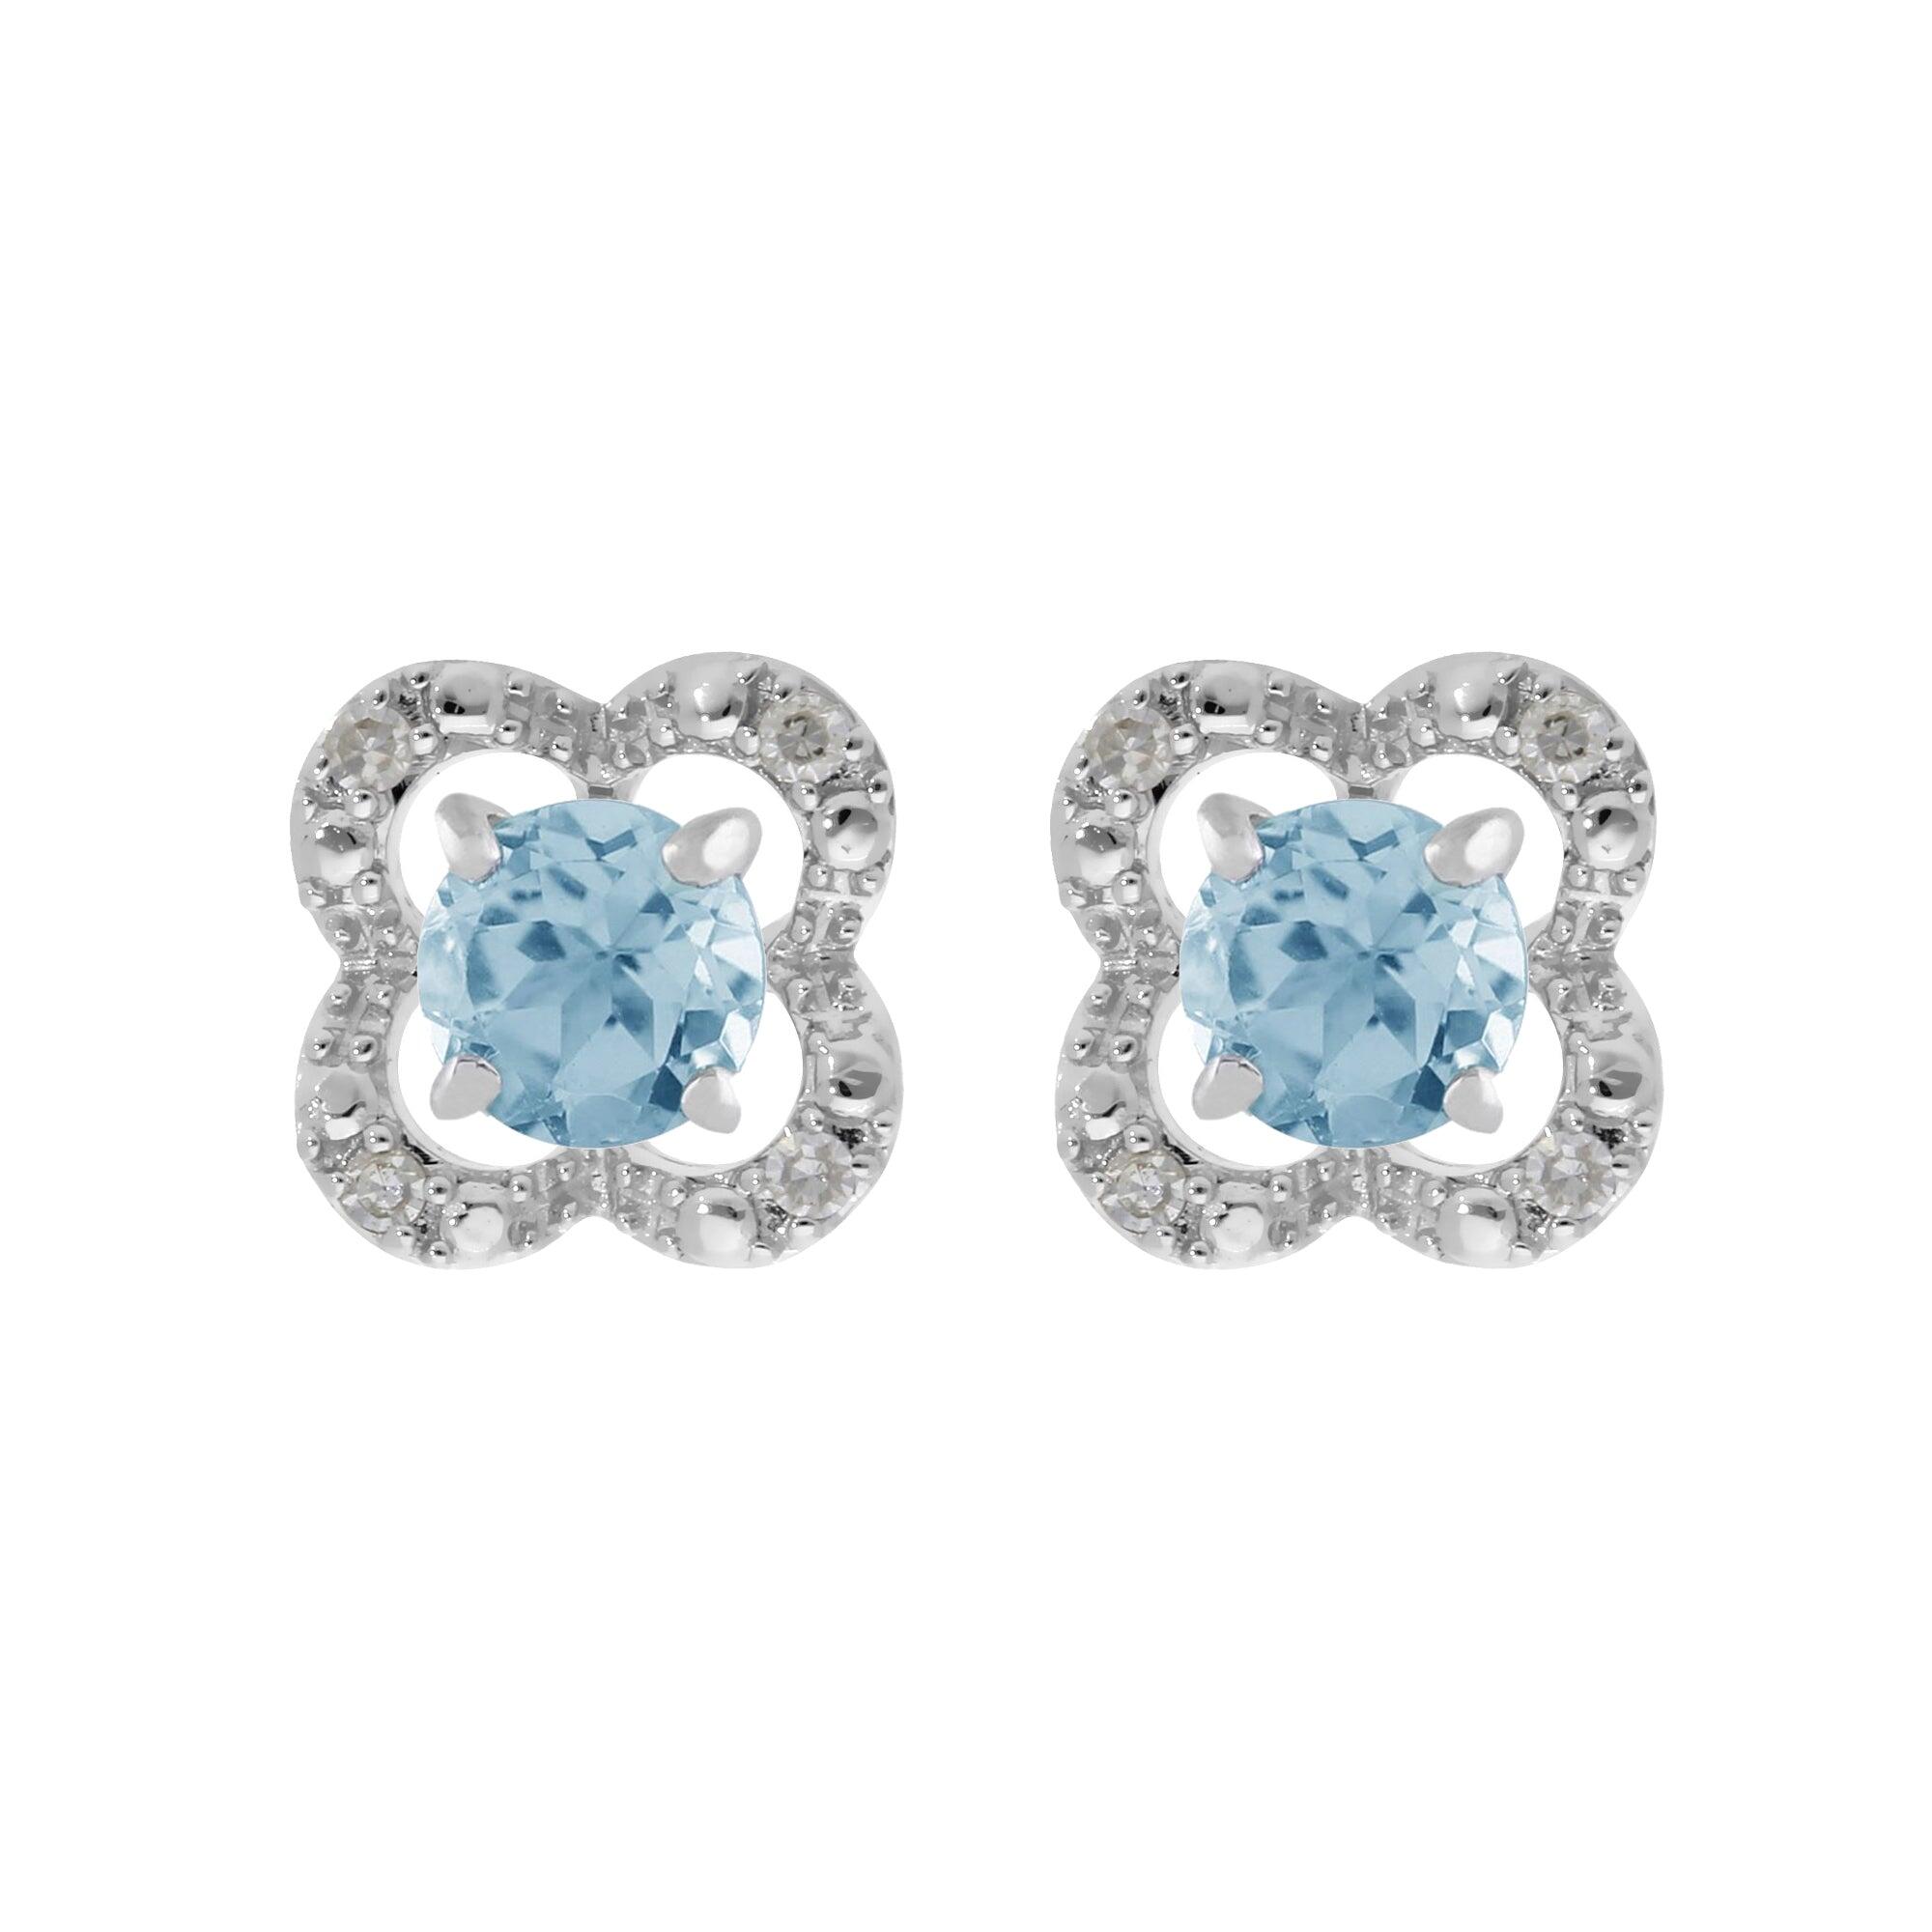 Classic Round Blue Topaz Stud Earrings with Detachable Diamond Flower Ear Jacket in 9ct White Gold